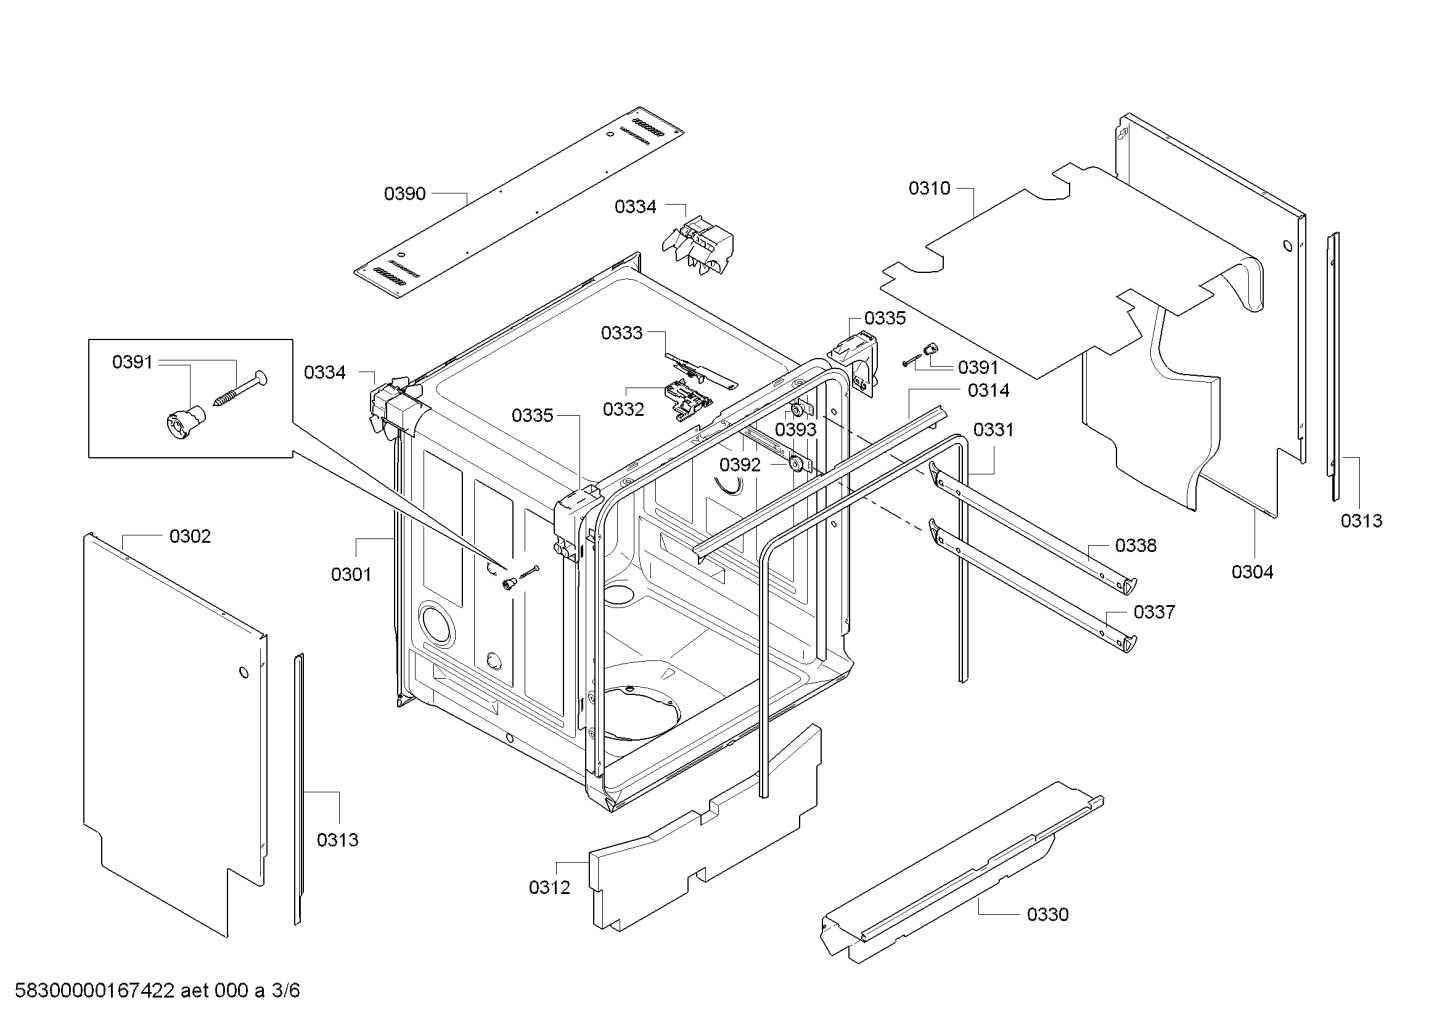 drawing_link_3_device_1648065